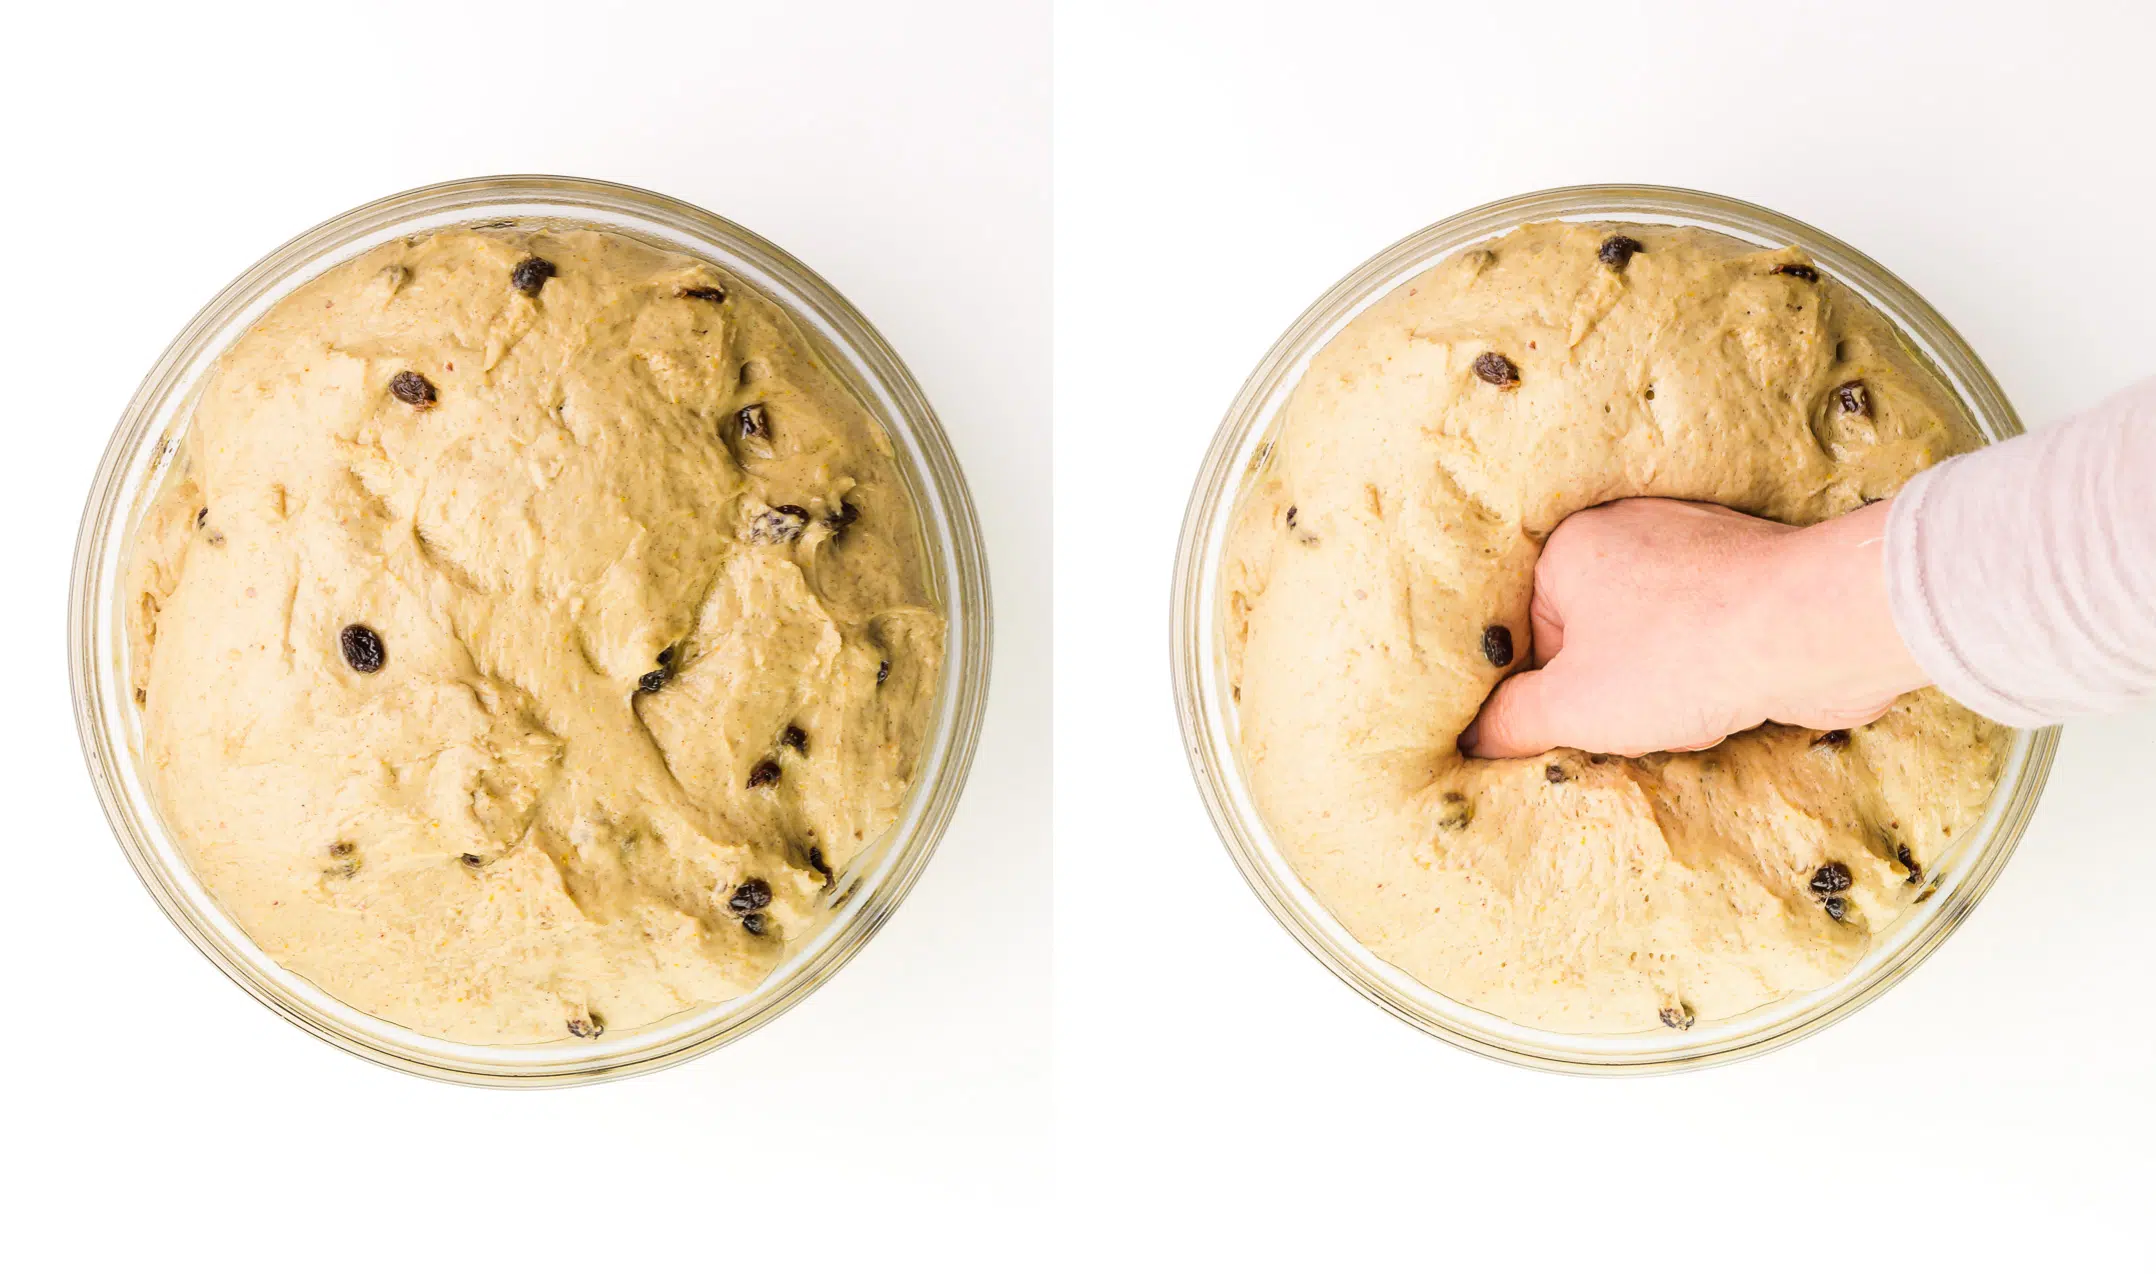 A collage of two images shows raised dough with raisins and a hand punching the dough down on the right.